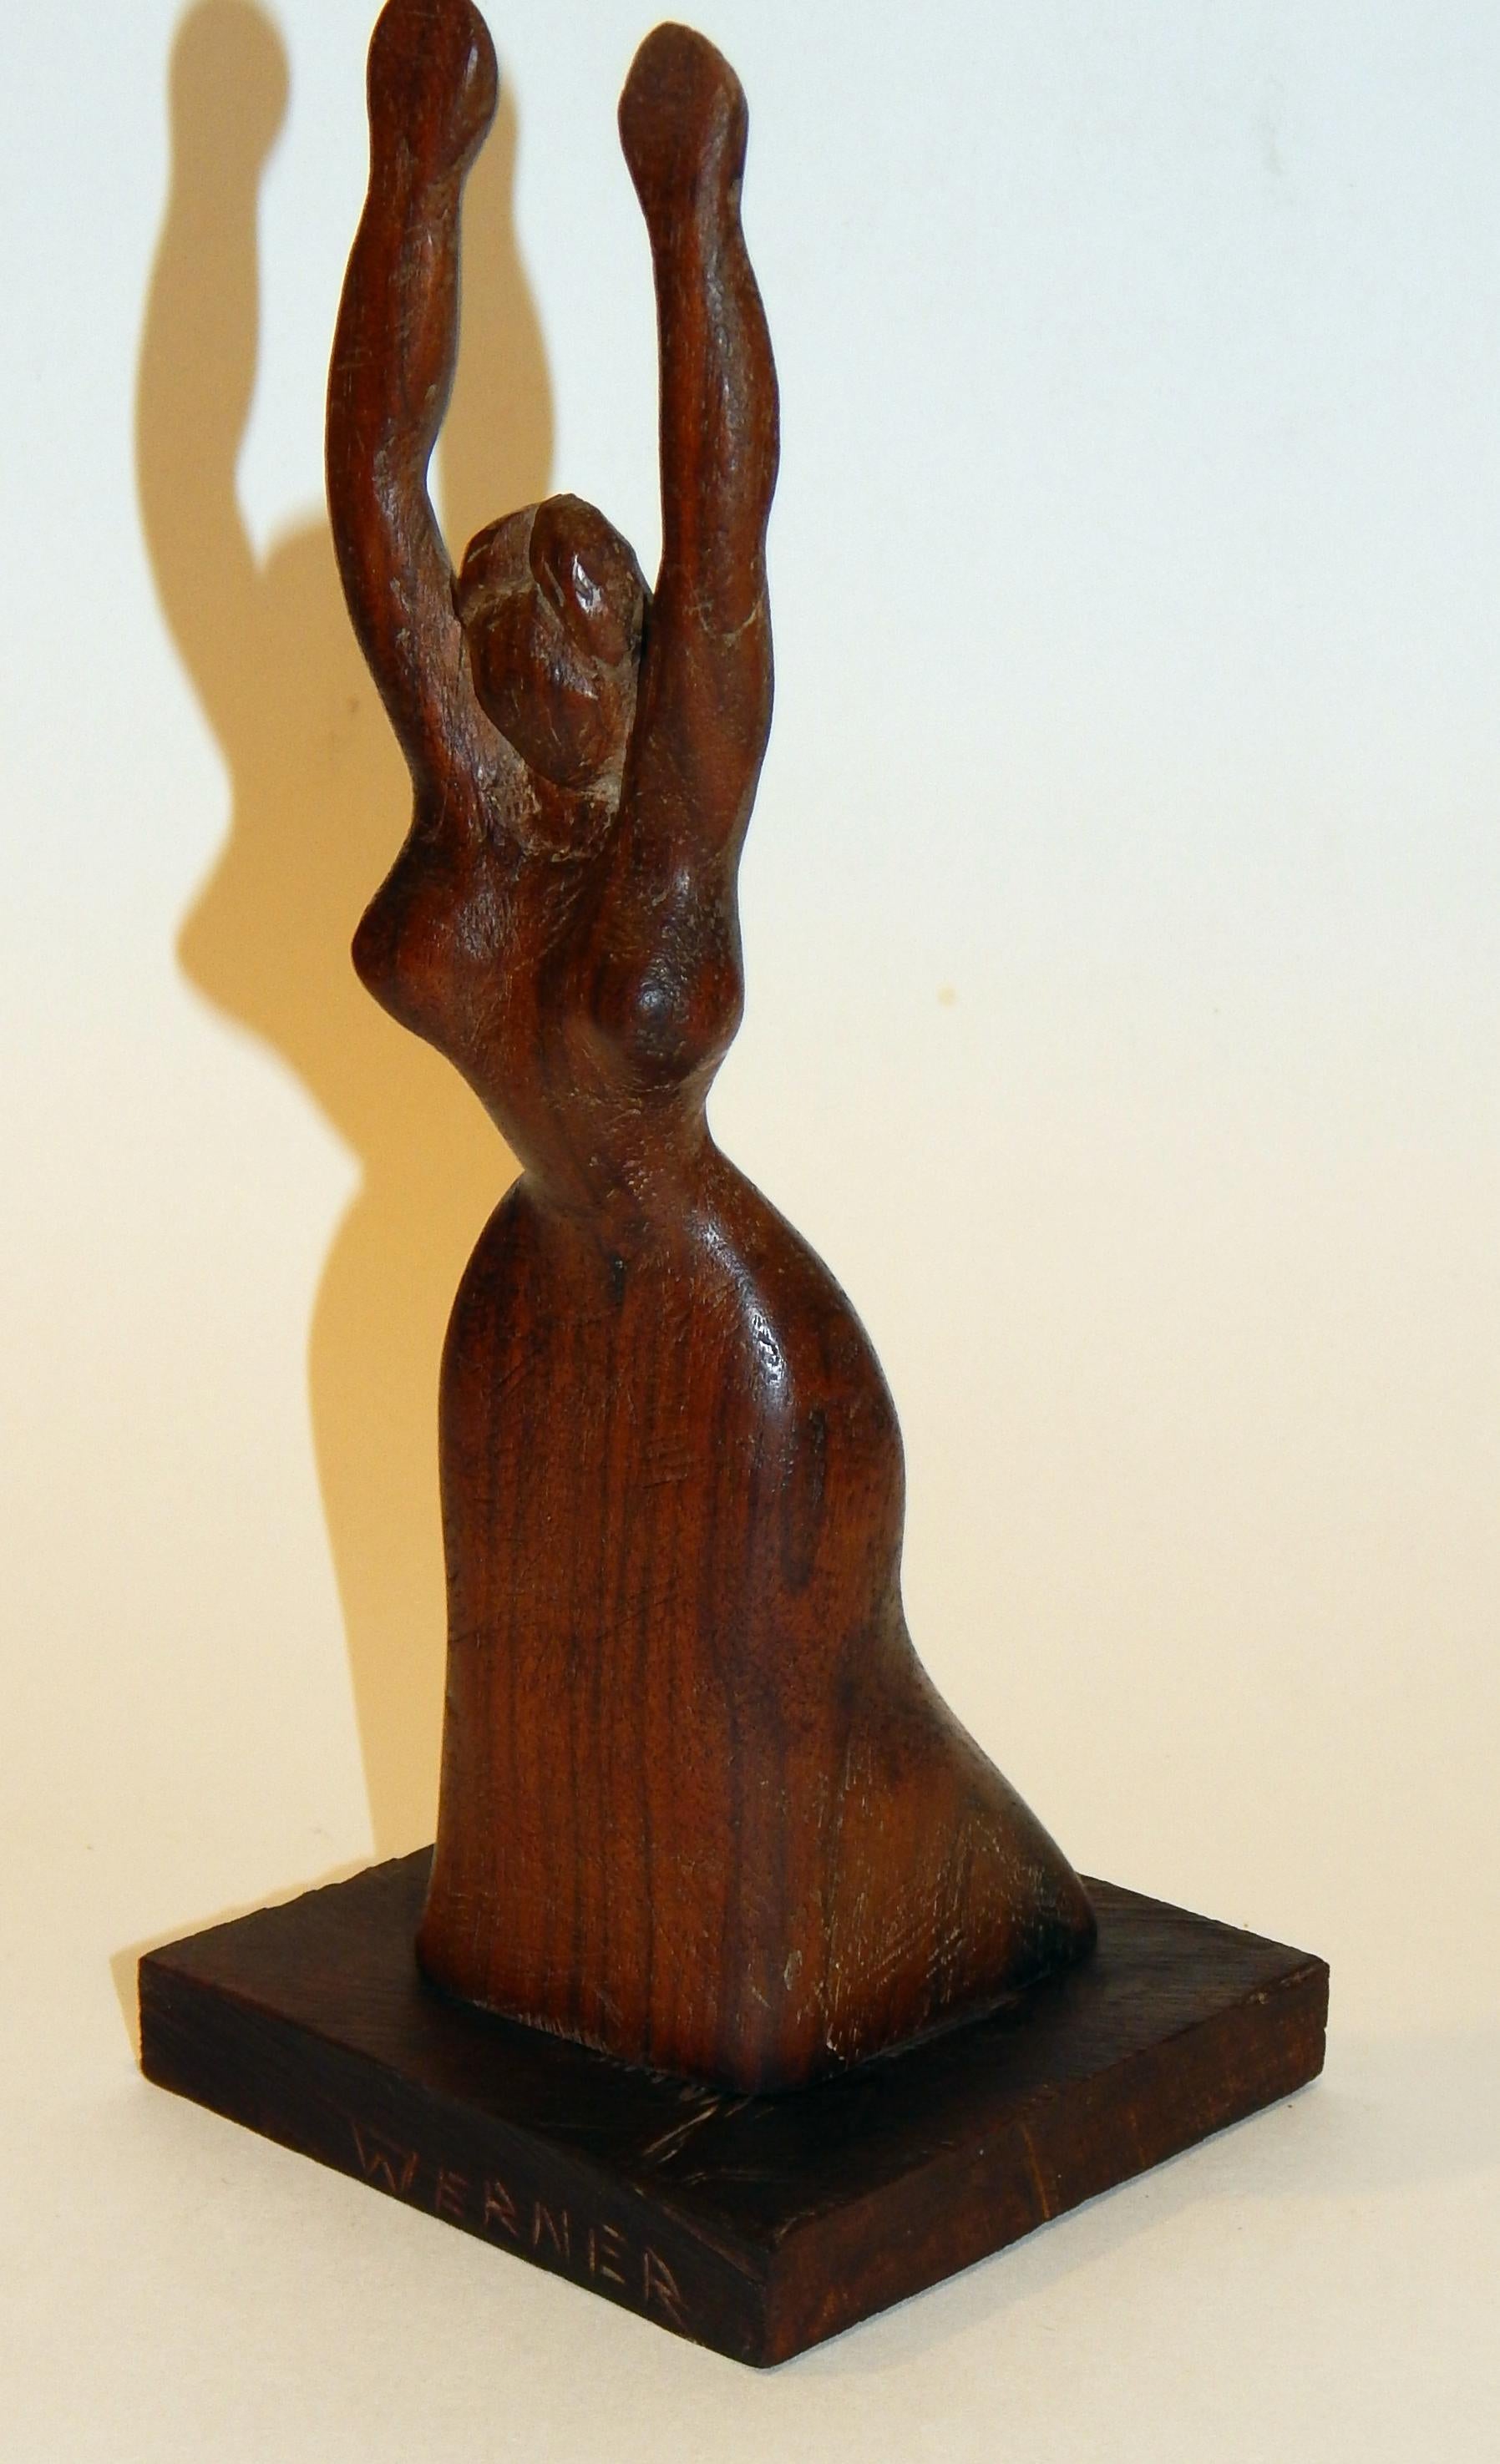 Wood sculpture by Nat Werner of a woman with arms outstretched.
Measures 10